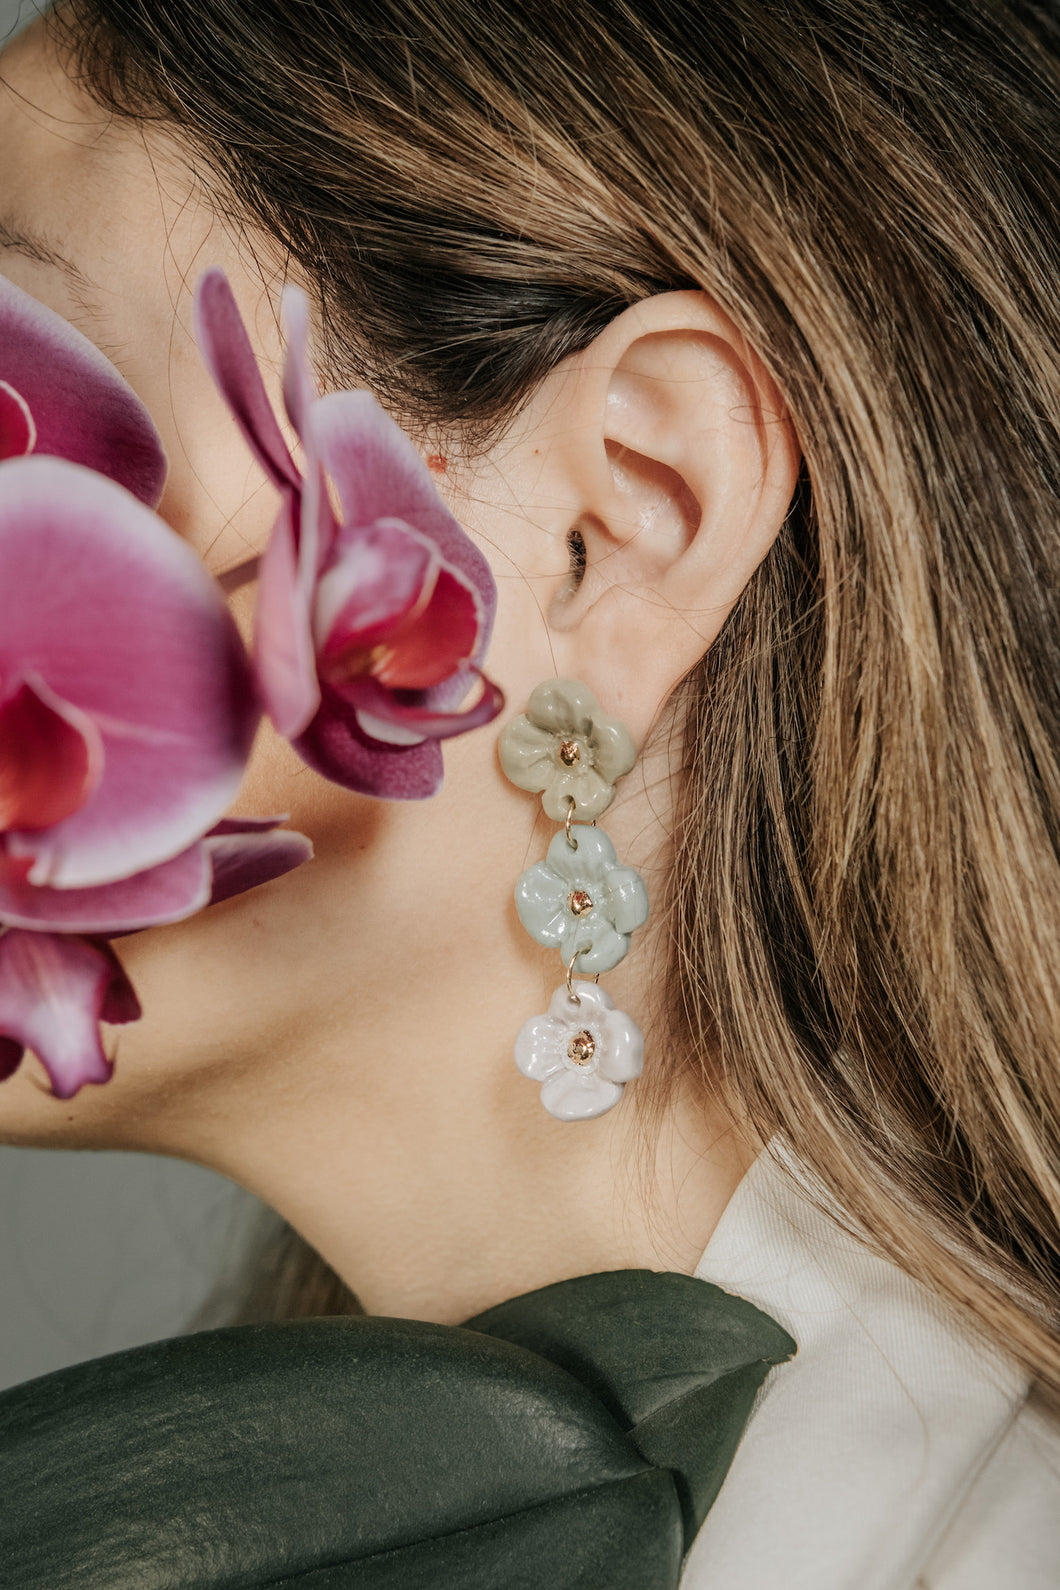 MADE TO ORDER LA FLOR EARRINGS TRIO